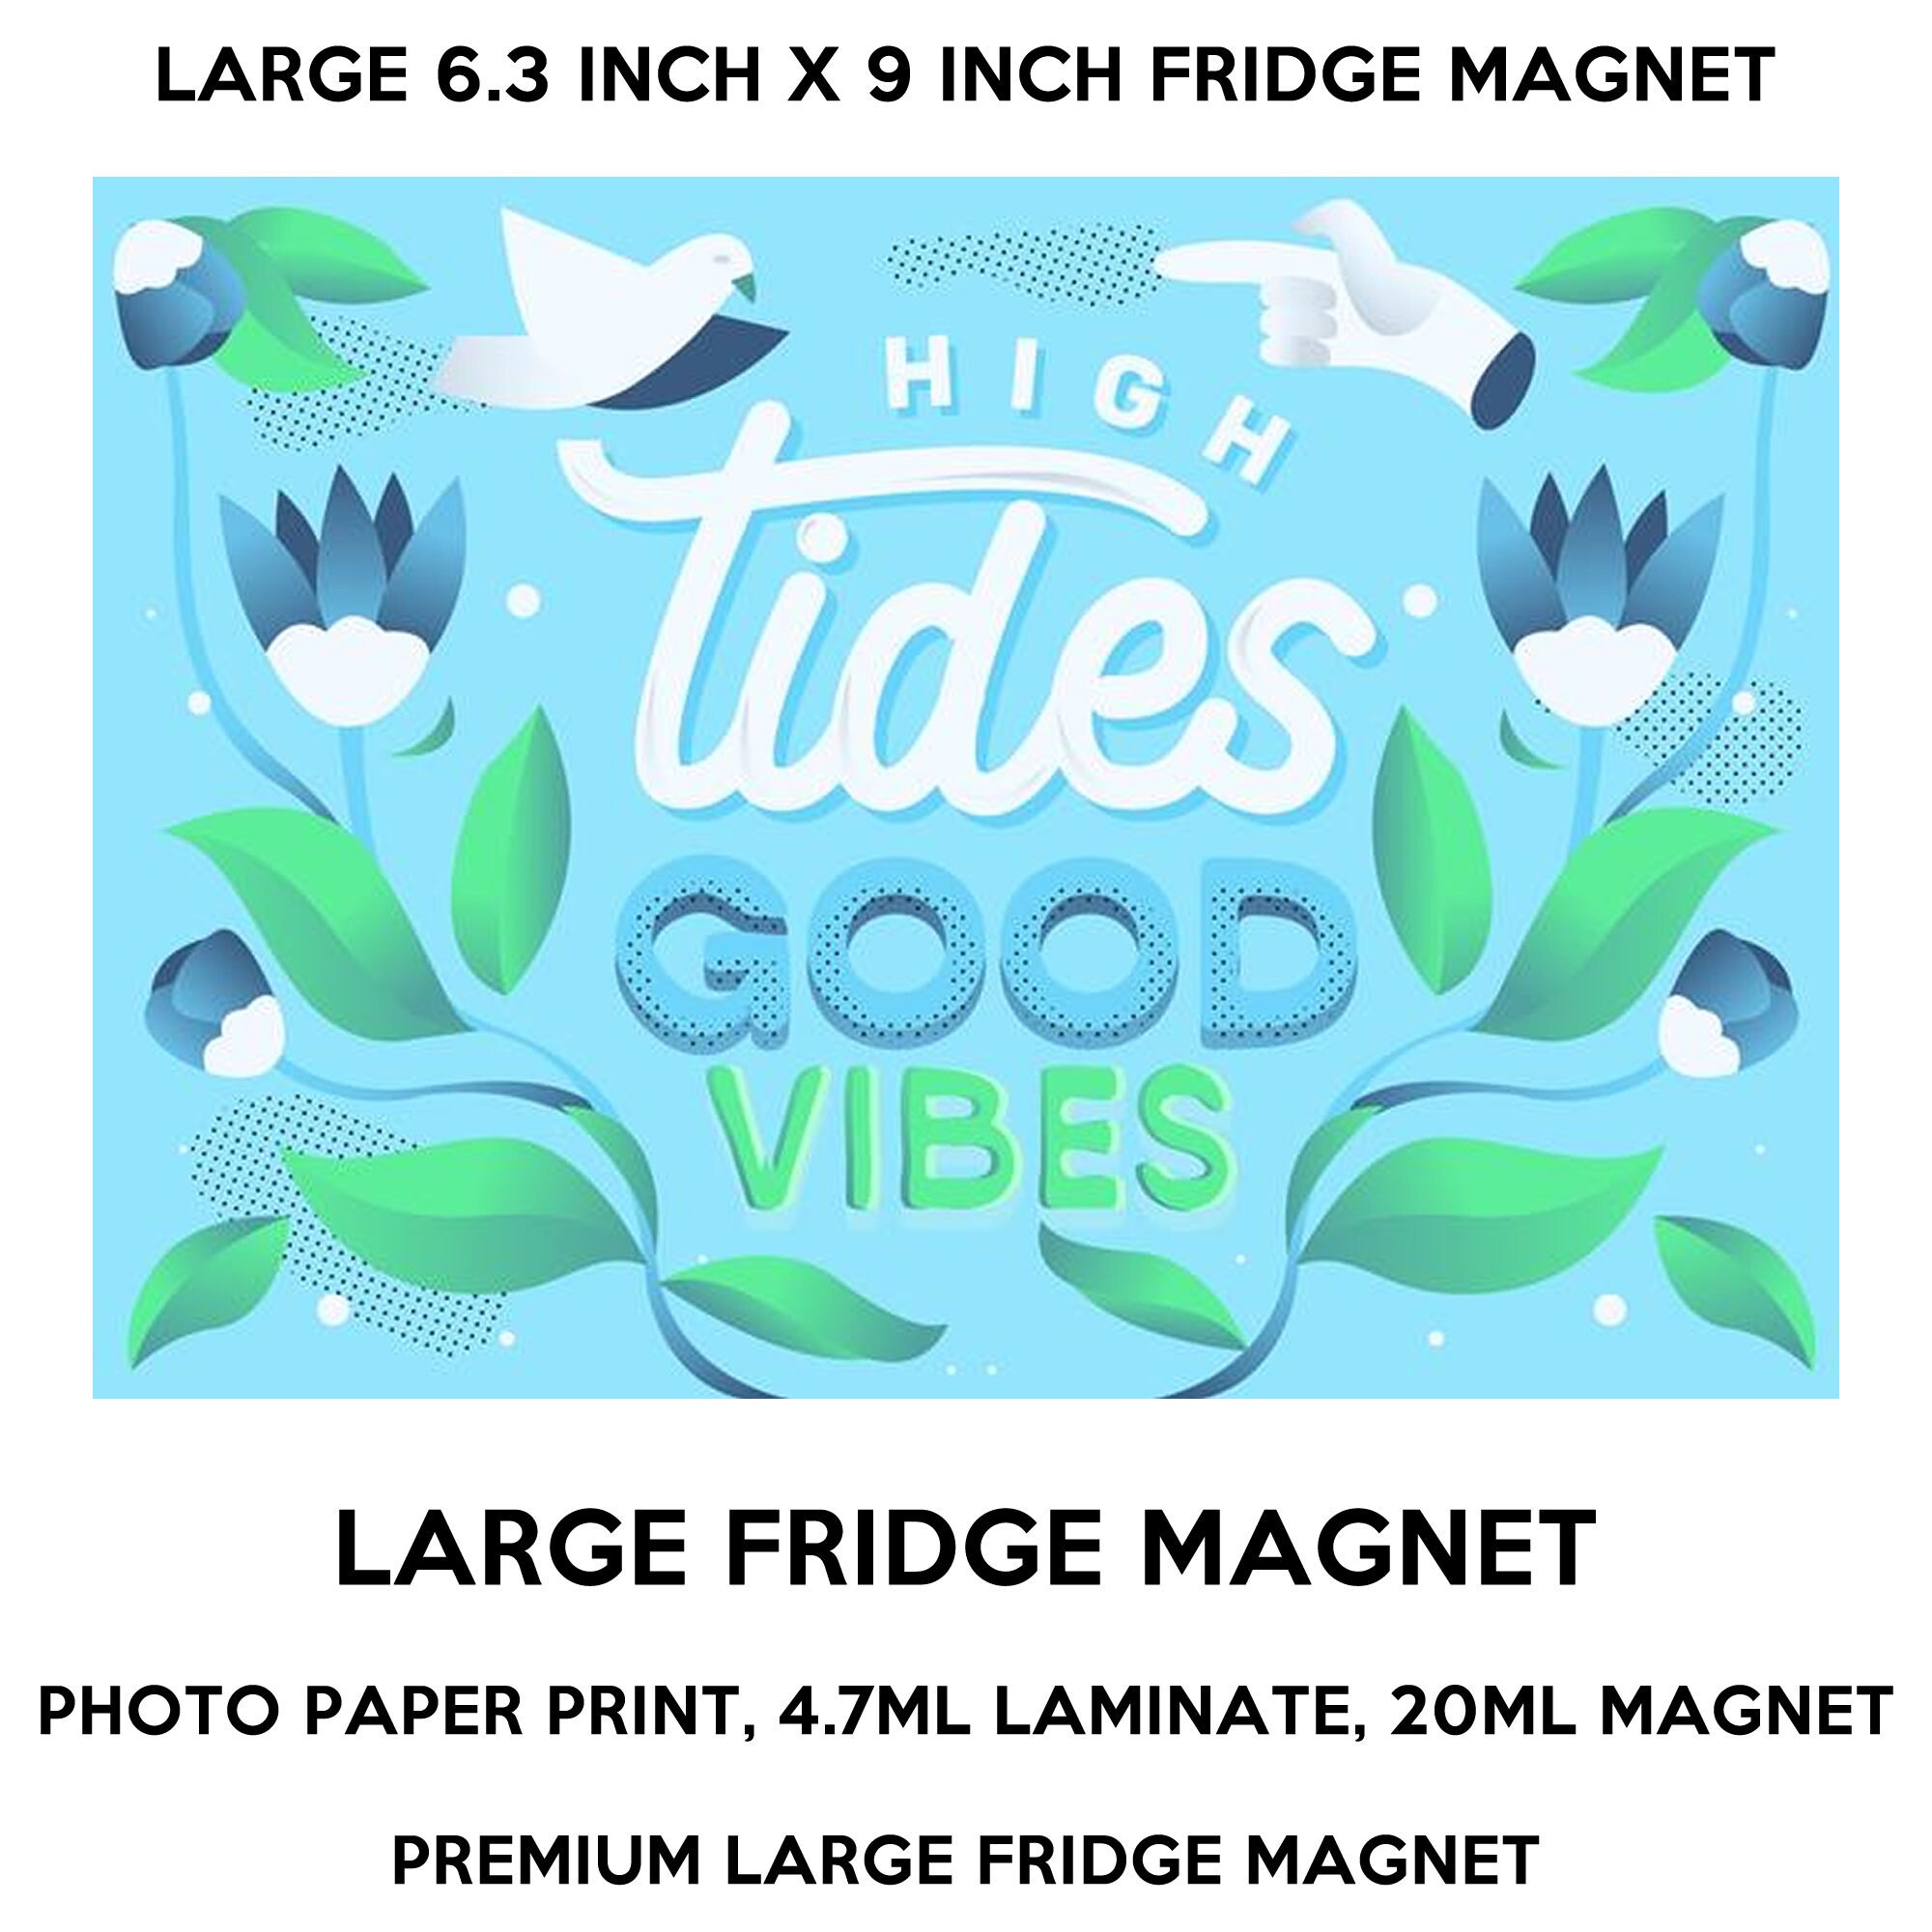 High tides good vibes 6.3 inch x 9 inch premium fridge magnet that stands out.